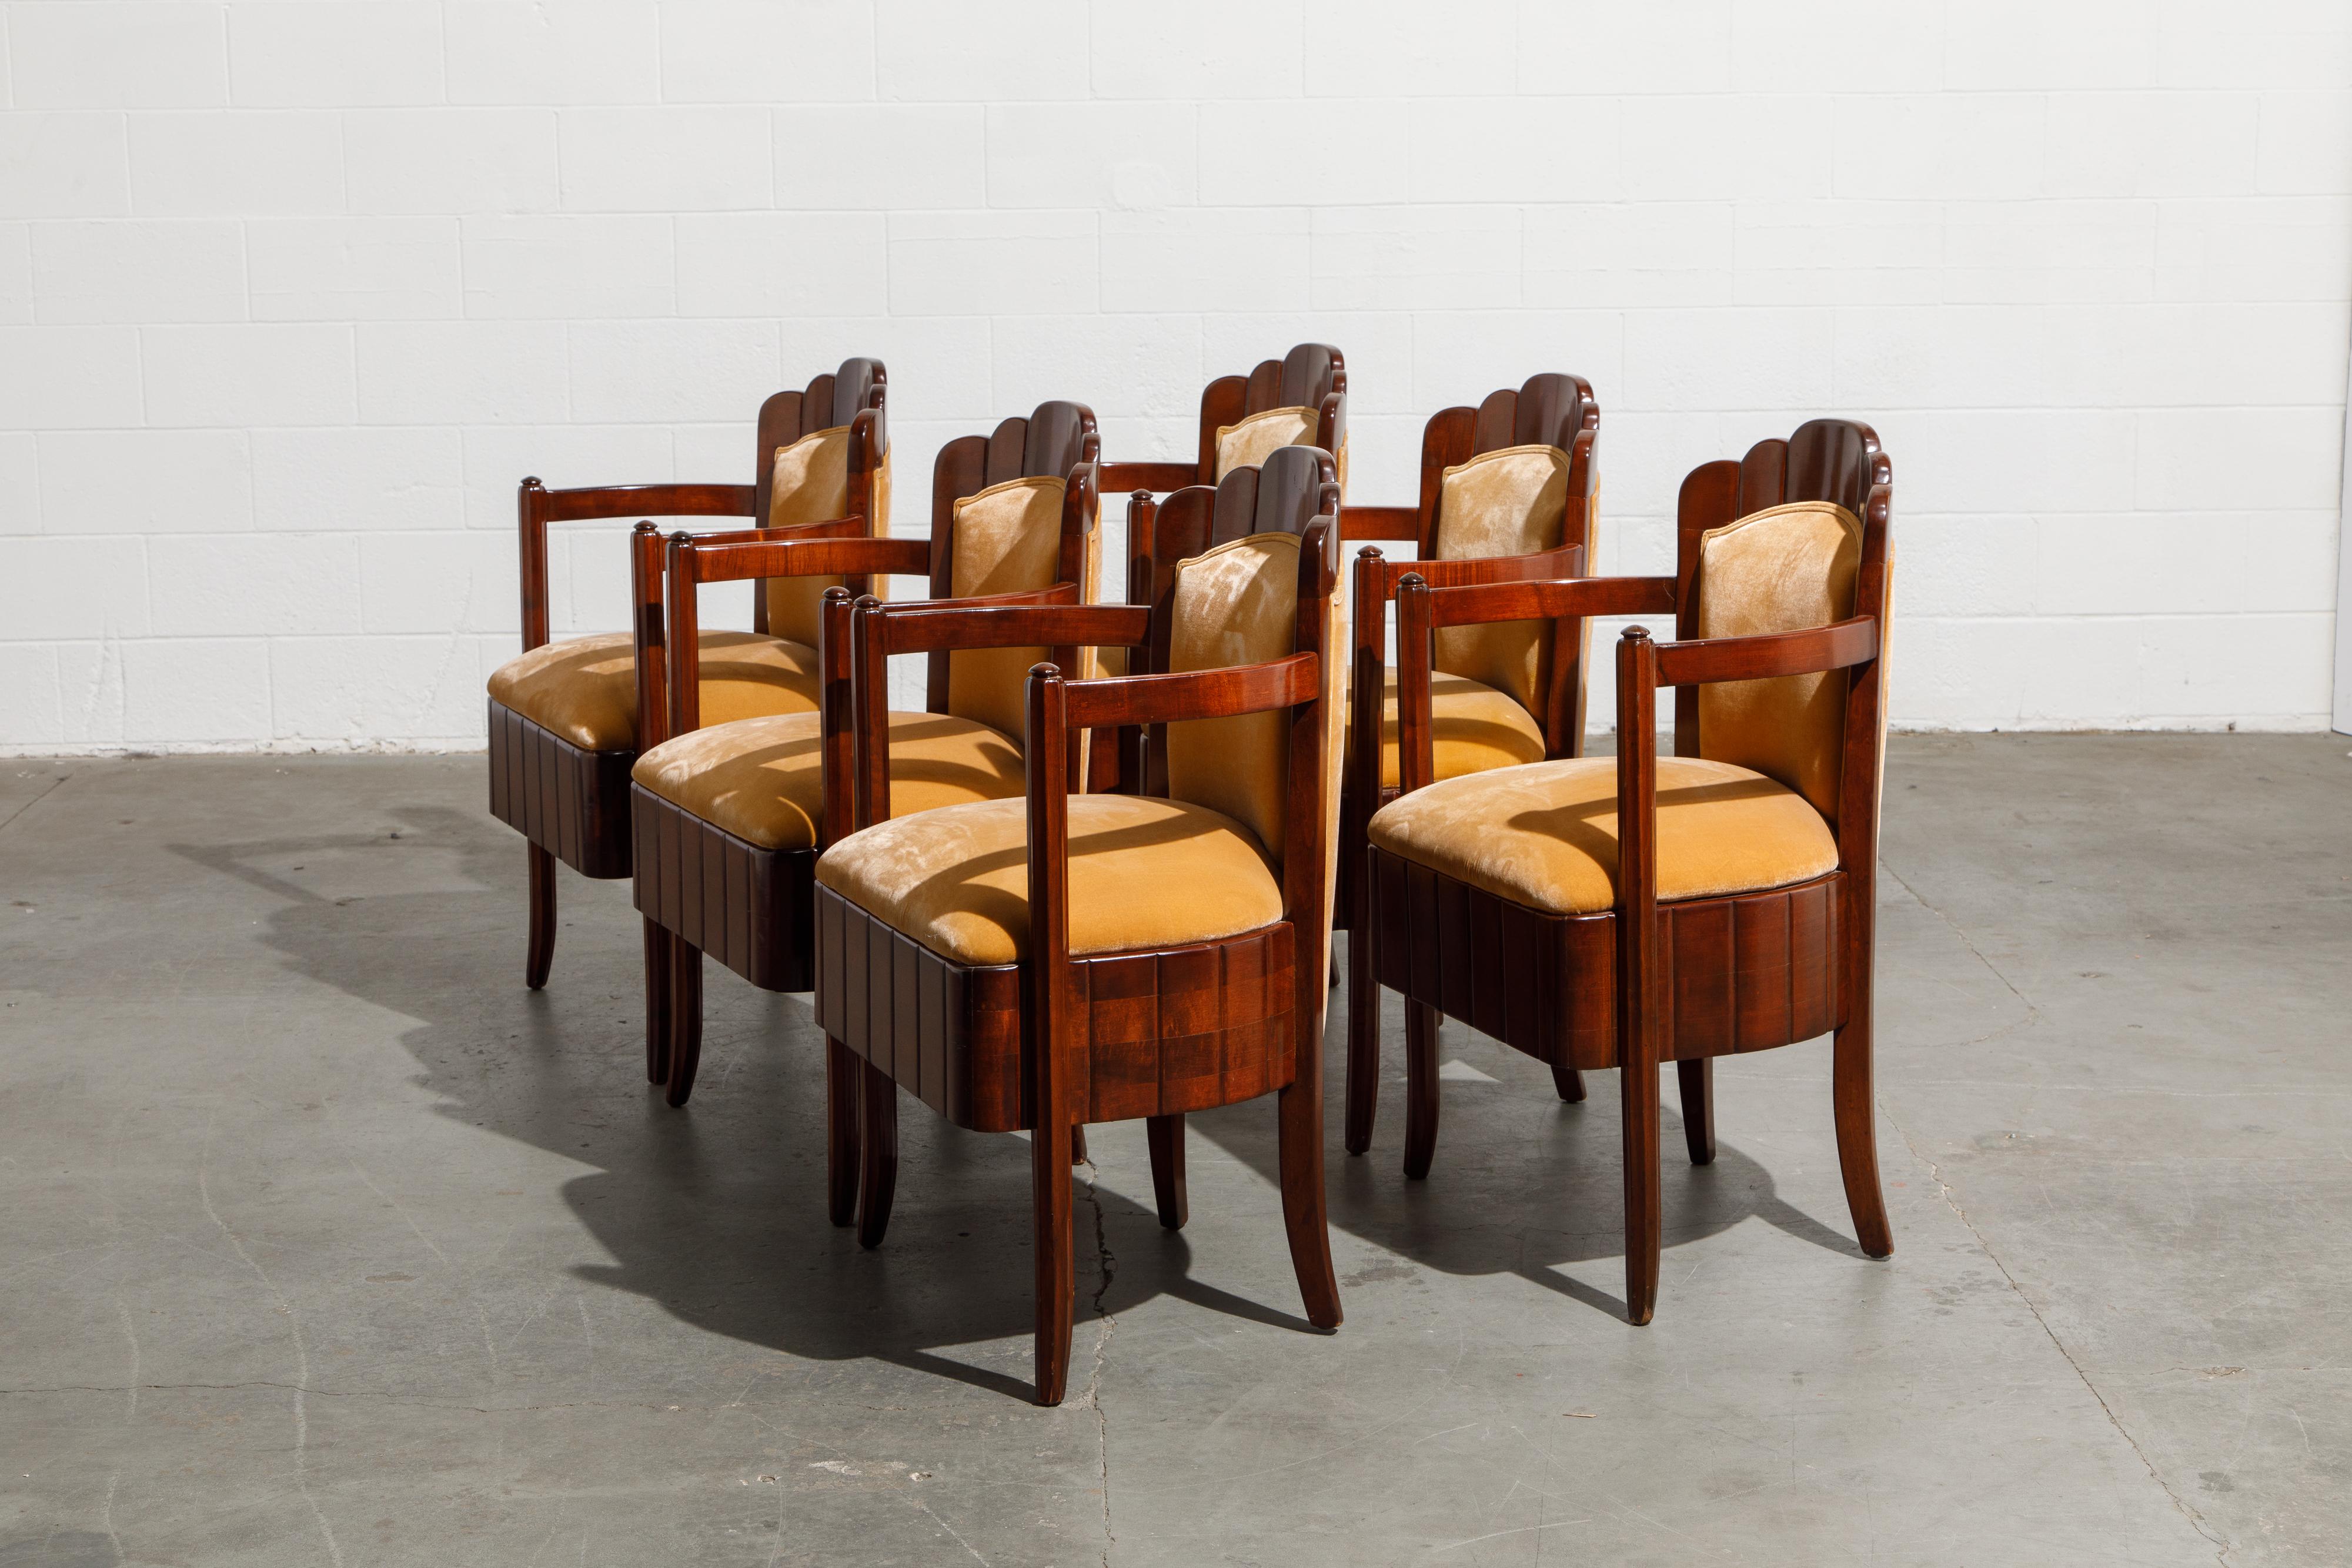 Early 20th Century Important Pierre Patout Mahogany Dining Chairs from S.S. Île de France, c. 1927 For Sale